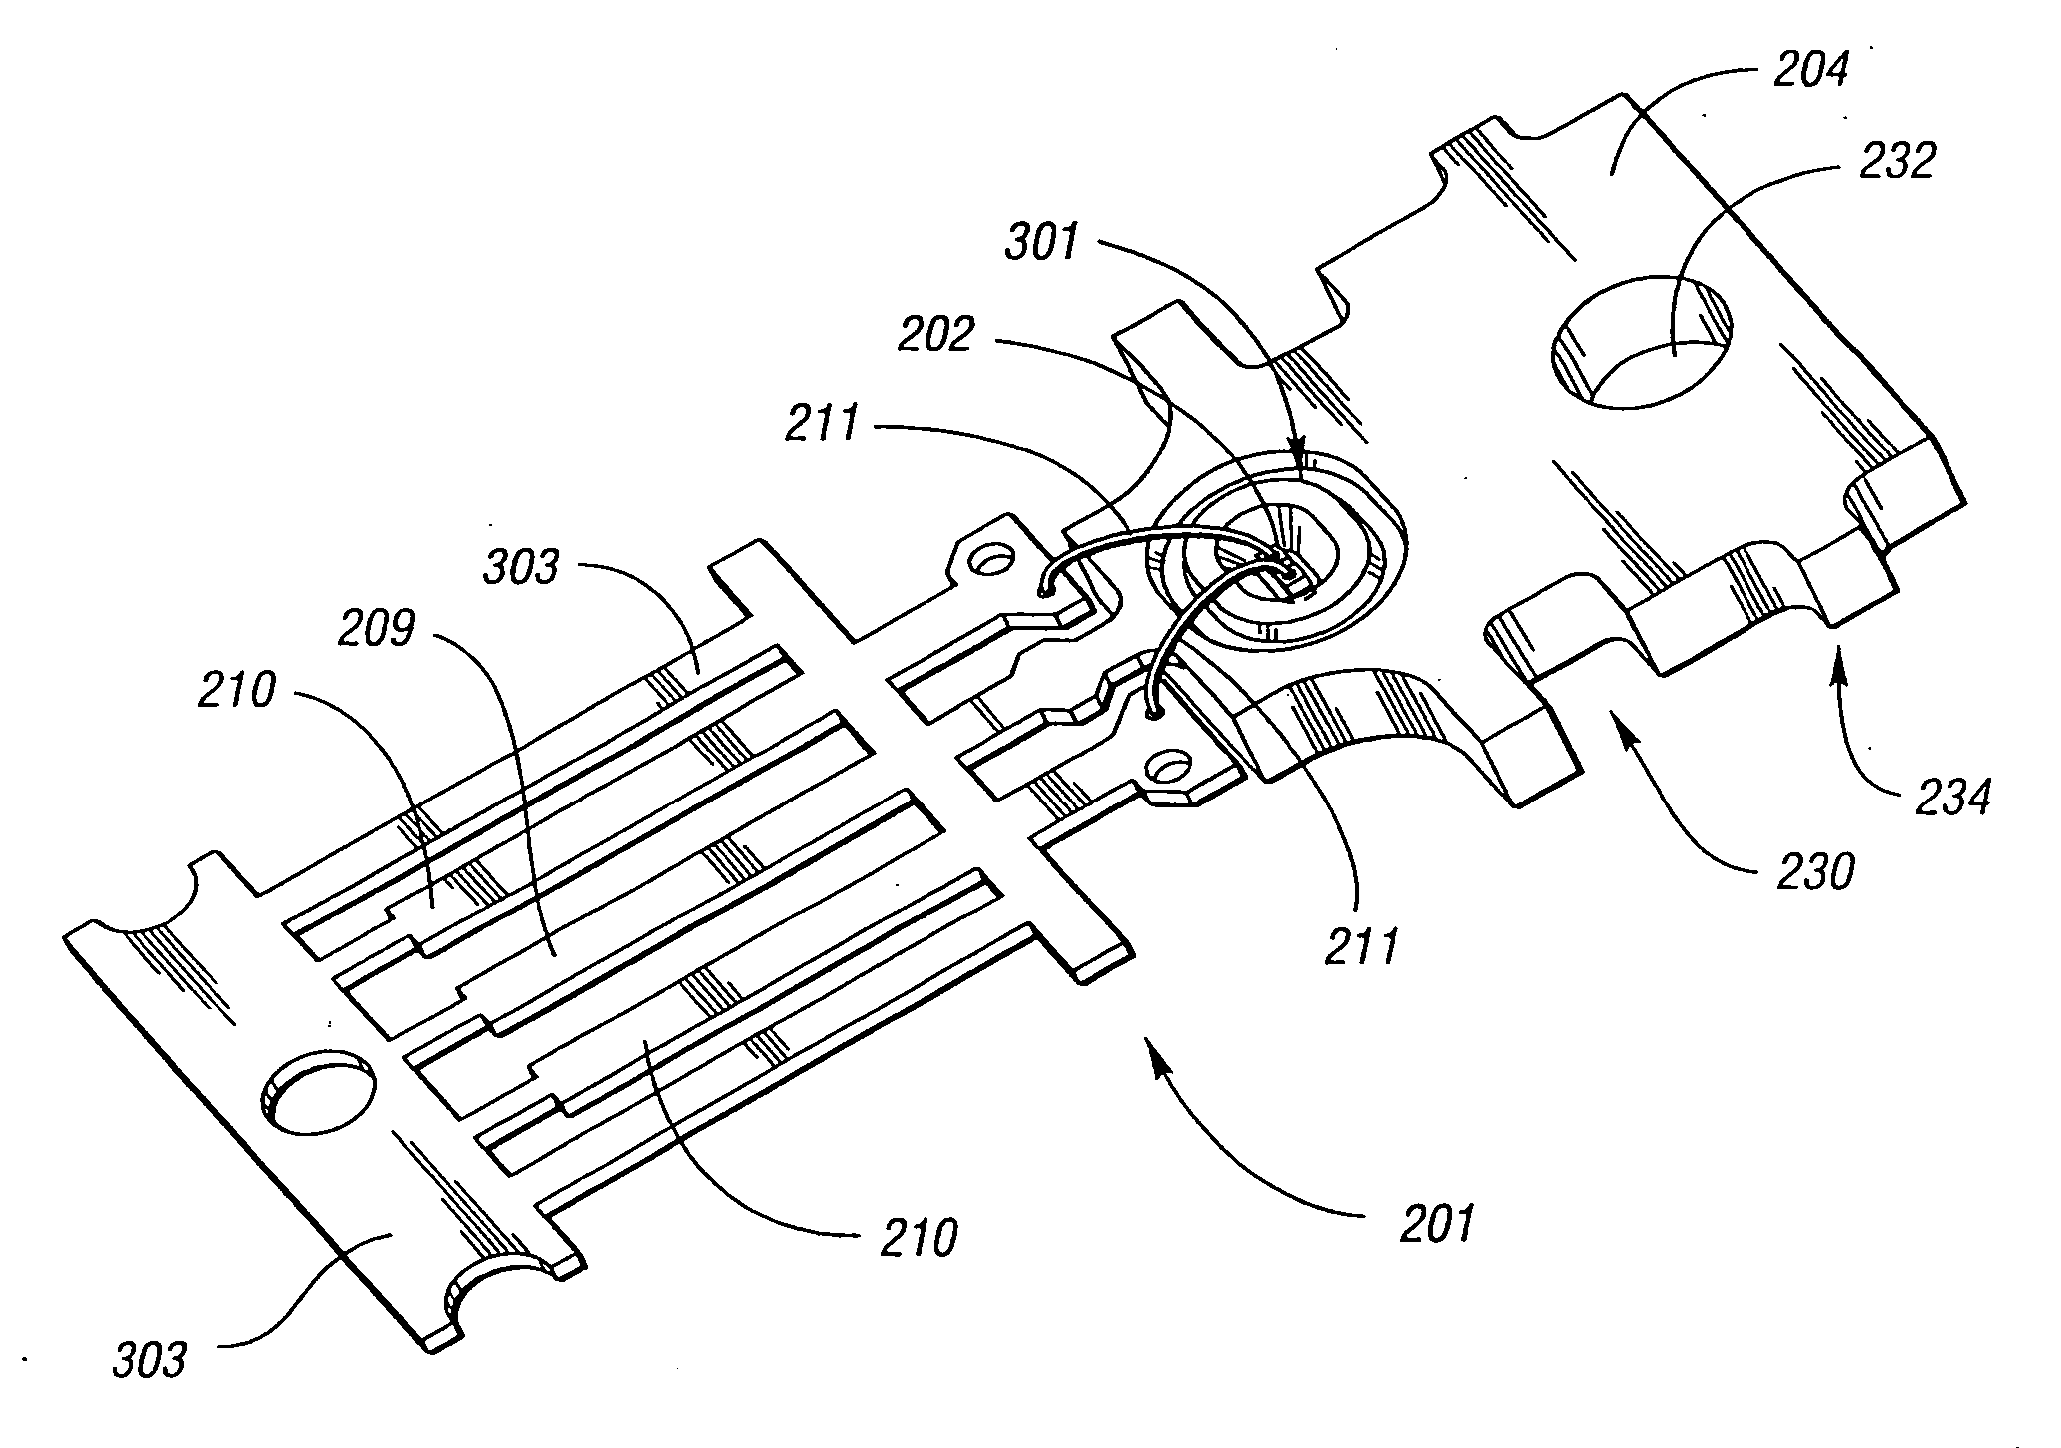 Semiconductor radiation emitter package